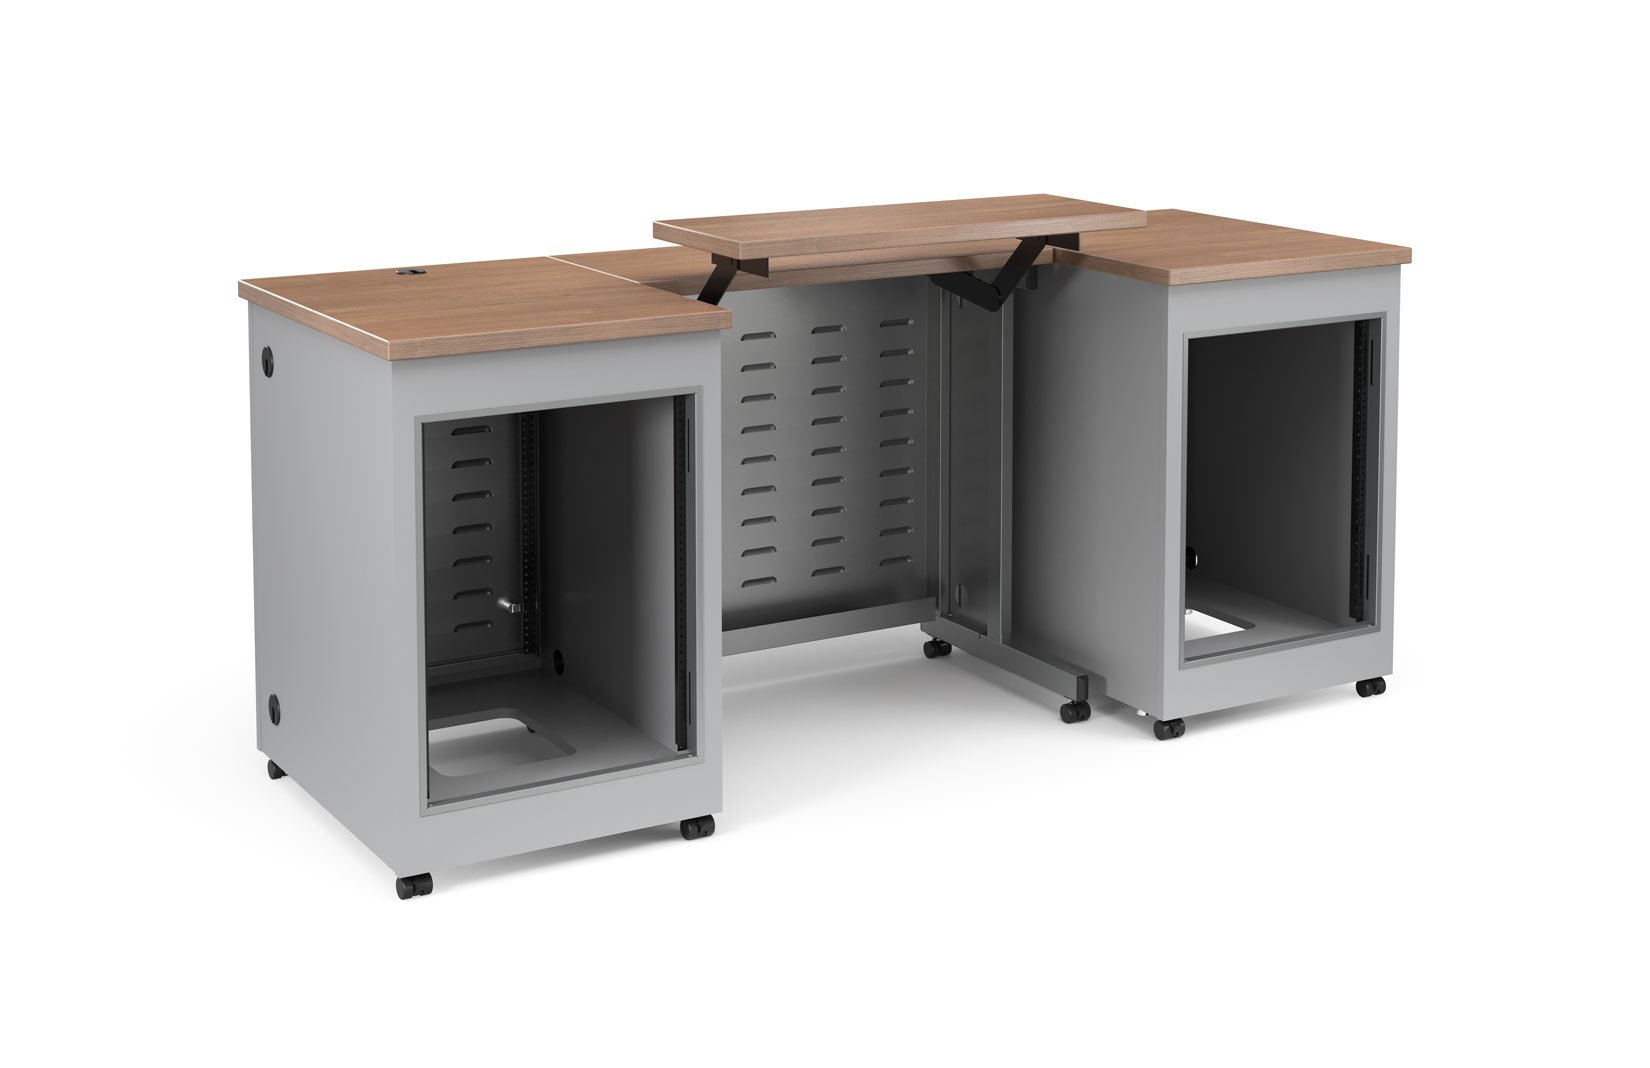 2022-08-15_Configurable_IT_Table_Lectern_and_Cabinets_Front_3.jpg